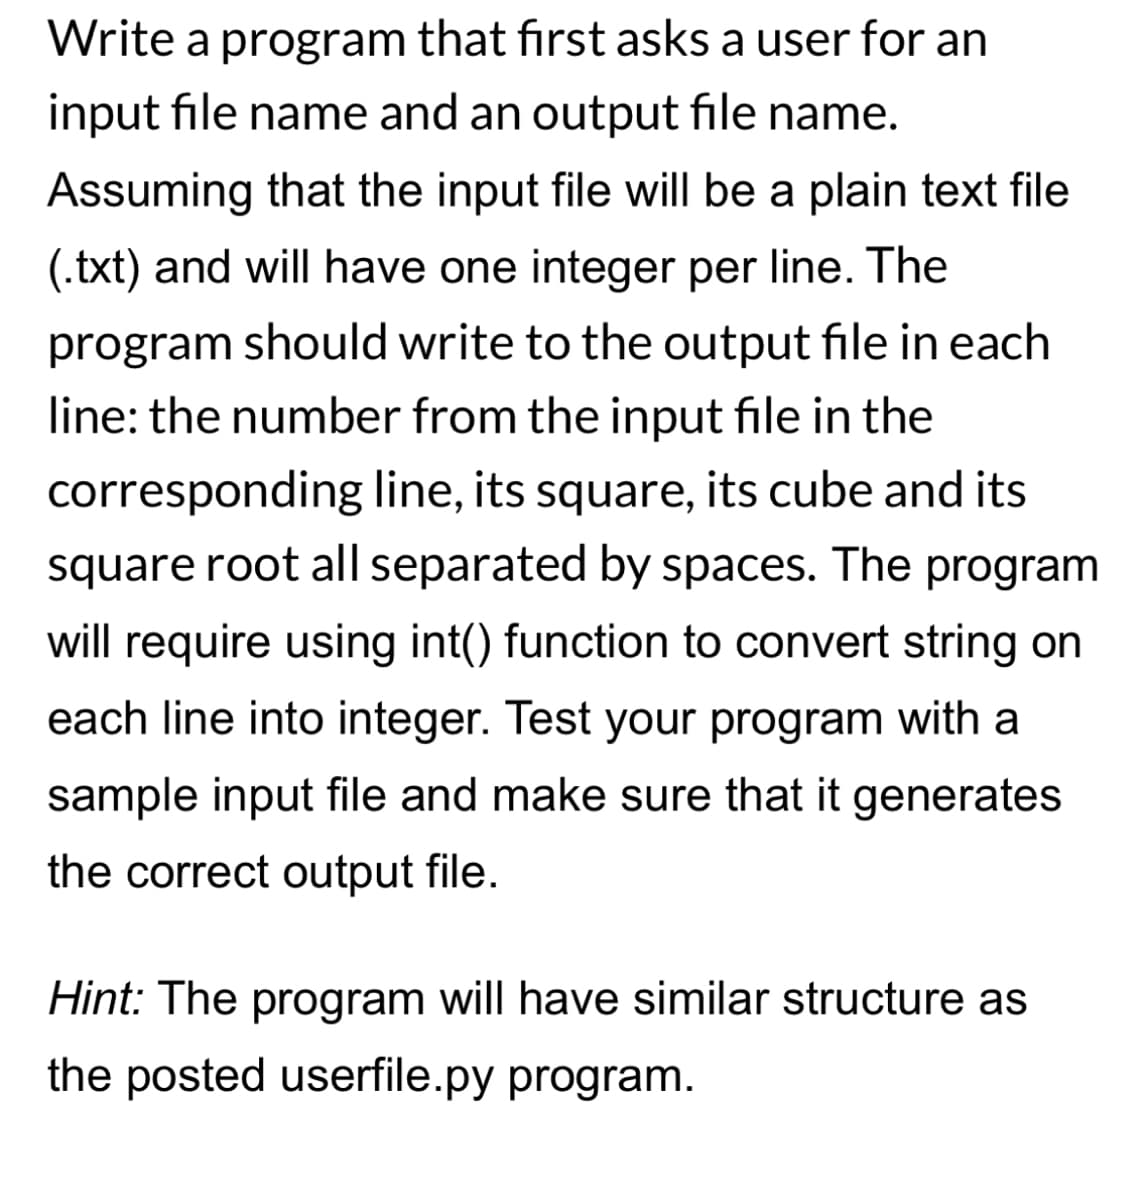 Write a program that first asks a user for an
input file name and an output file name.
Assuming that the input file will be a plain text file
(.txt) and will have one integer per line. The
program should write to the output file in each
line: the number from the input file in the
corresponding line, its square, its cube and its
square root all separated by spaces. The program
will require using int() function to convert string on
each line into integer. Test your program with a
sample input file and make sure that it generates
the correct output file.
Hint: The program will have similar structure as
the posted userfile.py program.